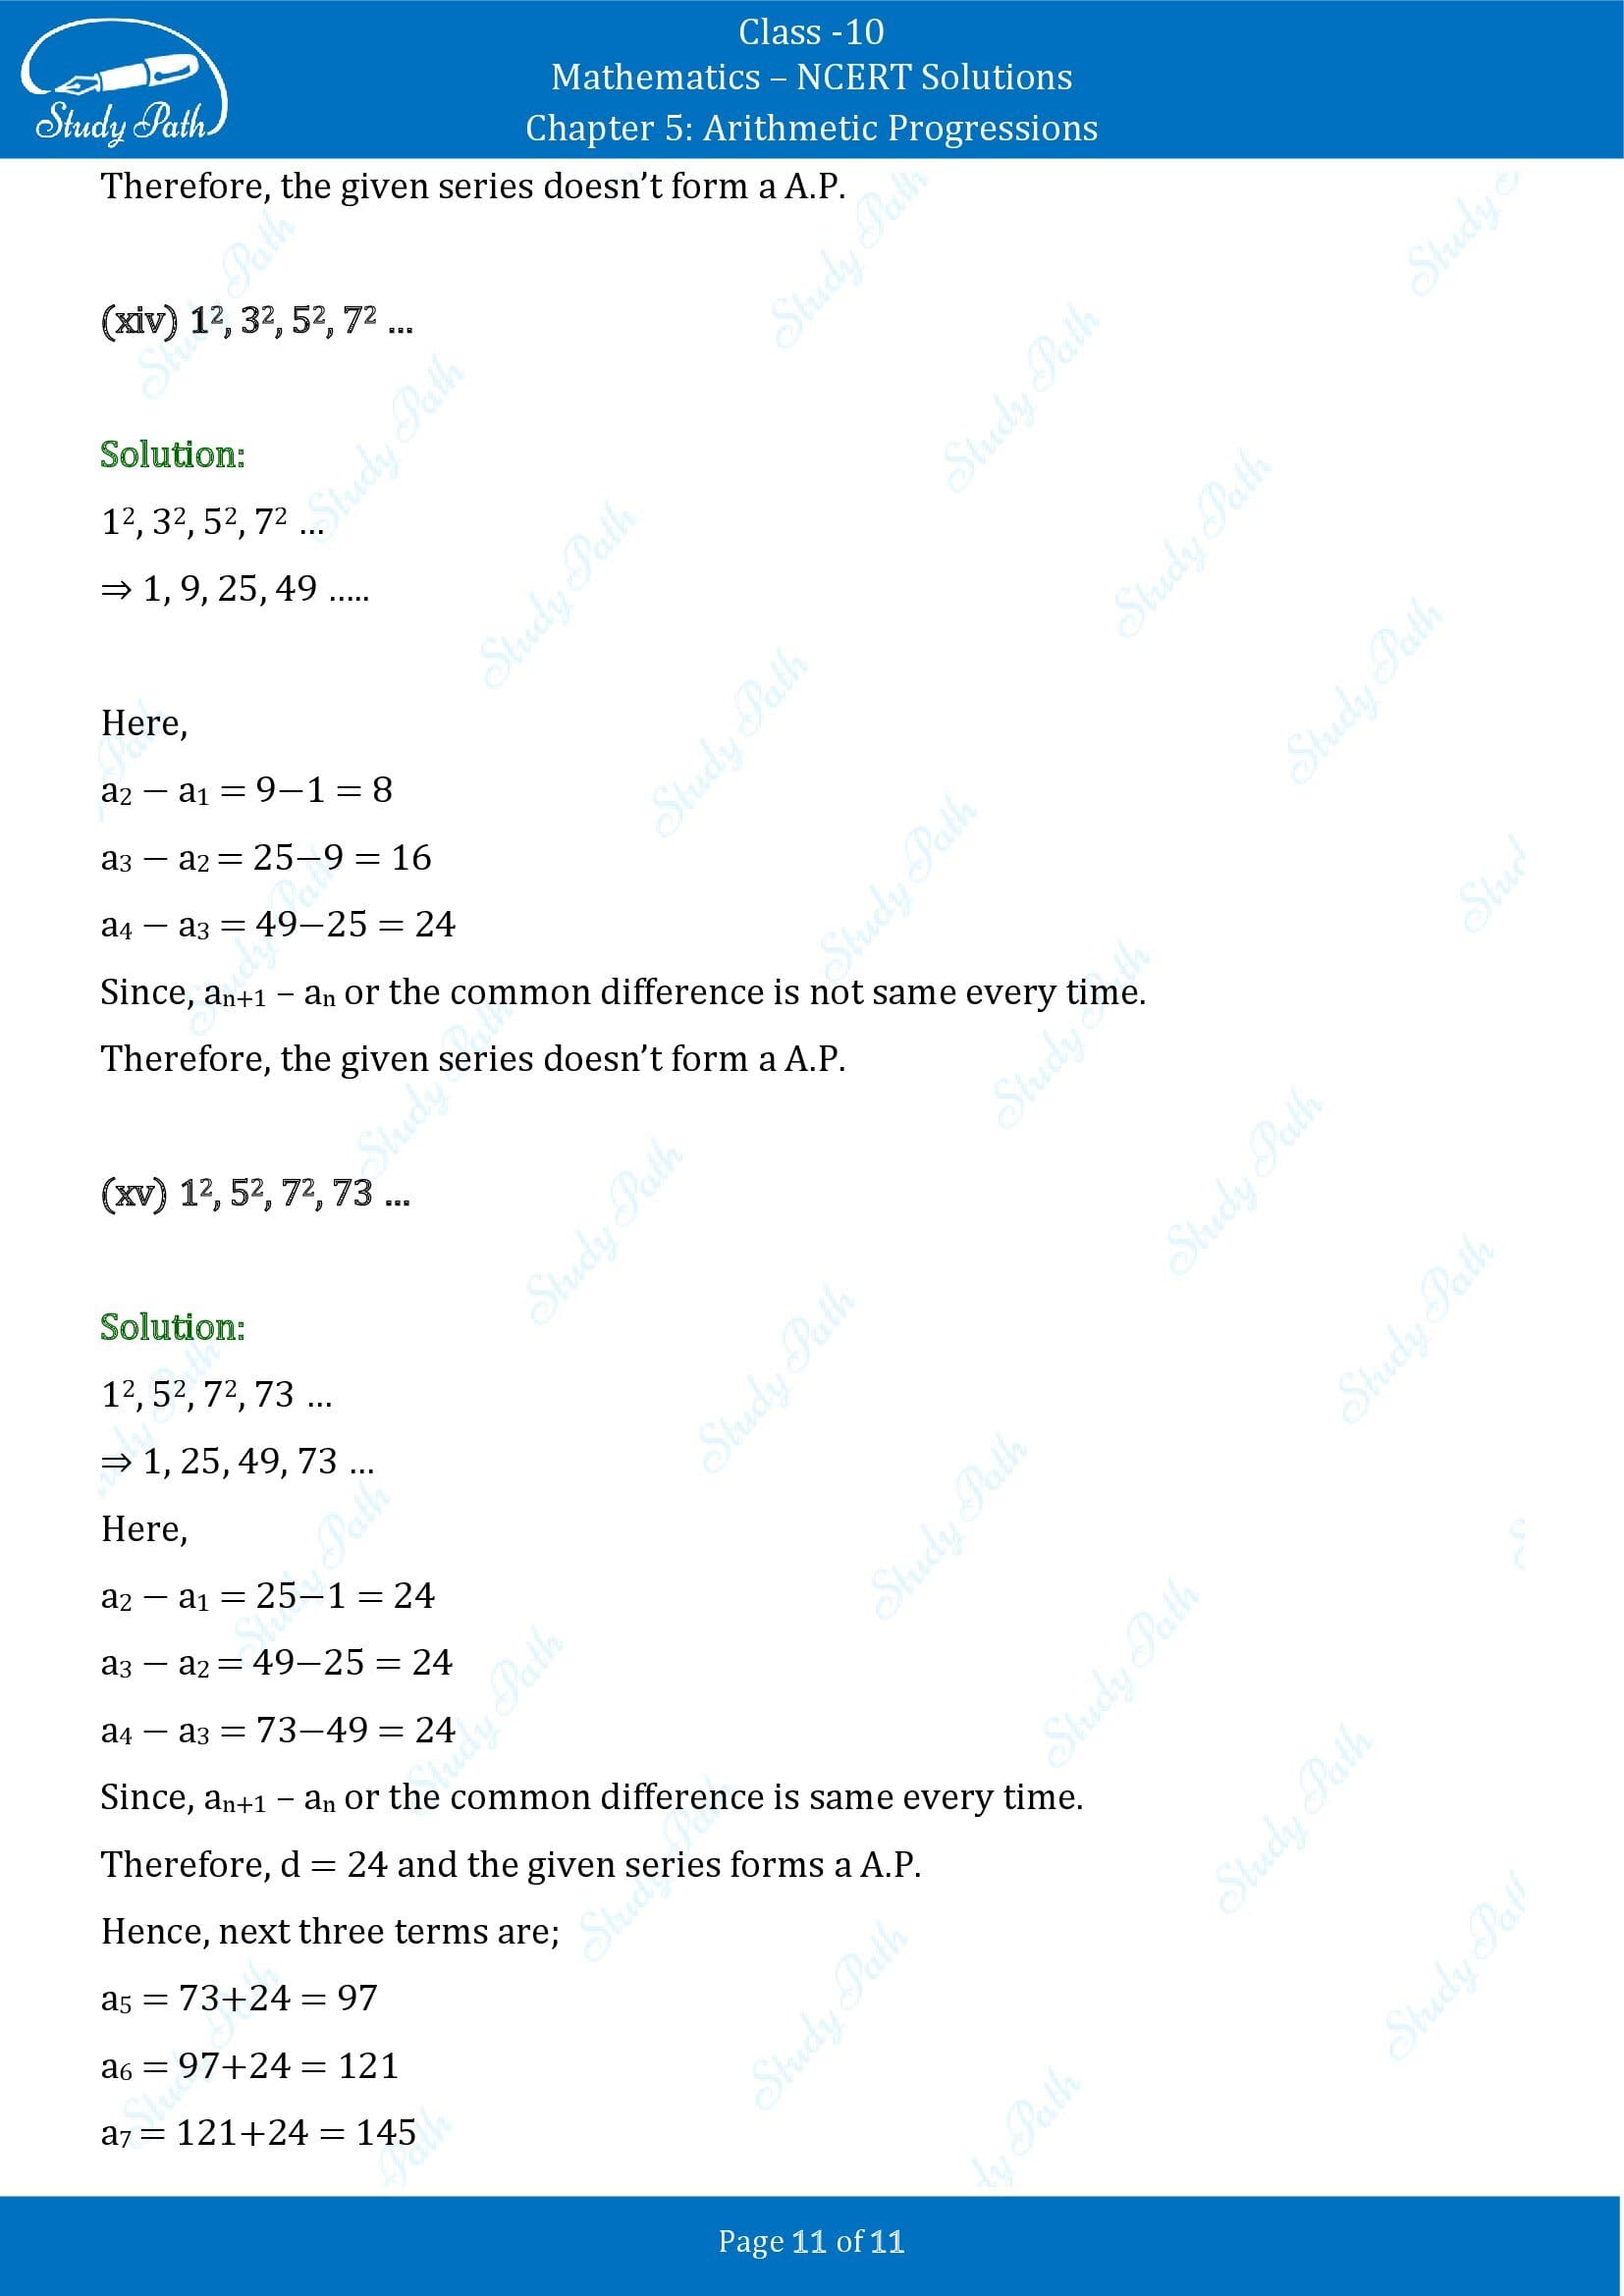 NCERT Solutions for Class 10 Maths Chapter 5 Arithmetic Progressions Exercise 5.1 00011